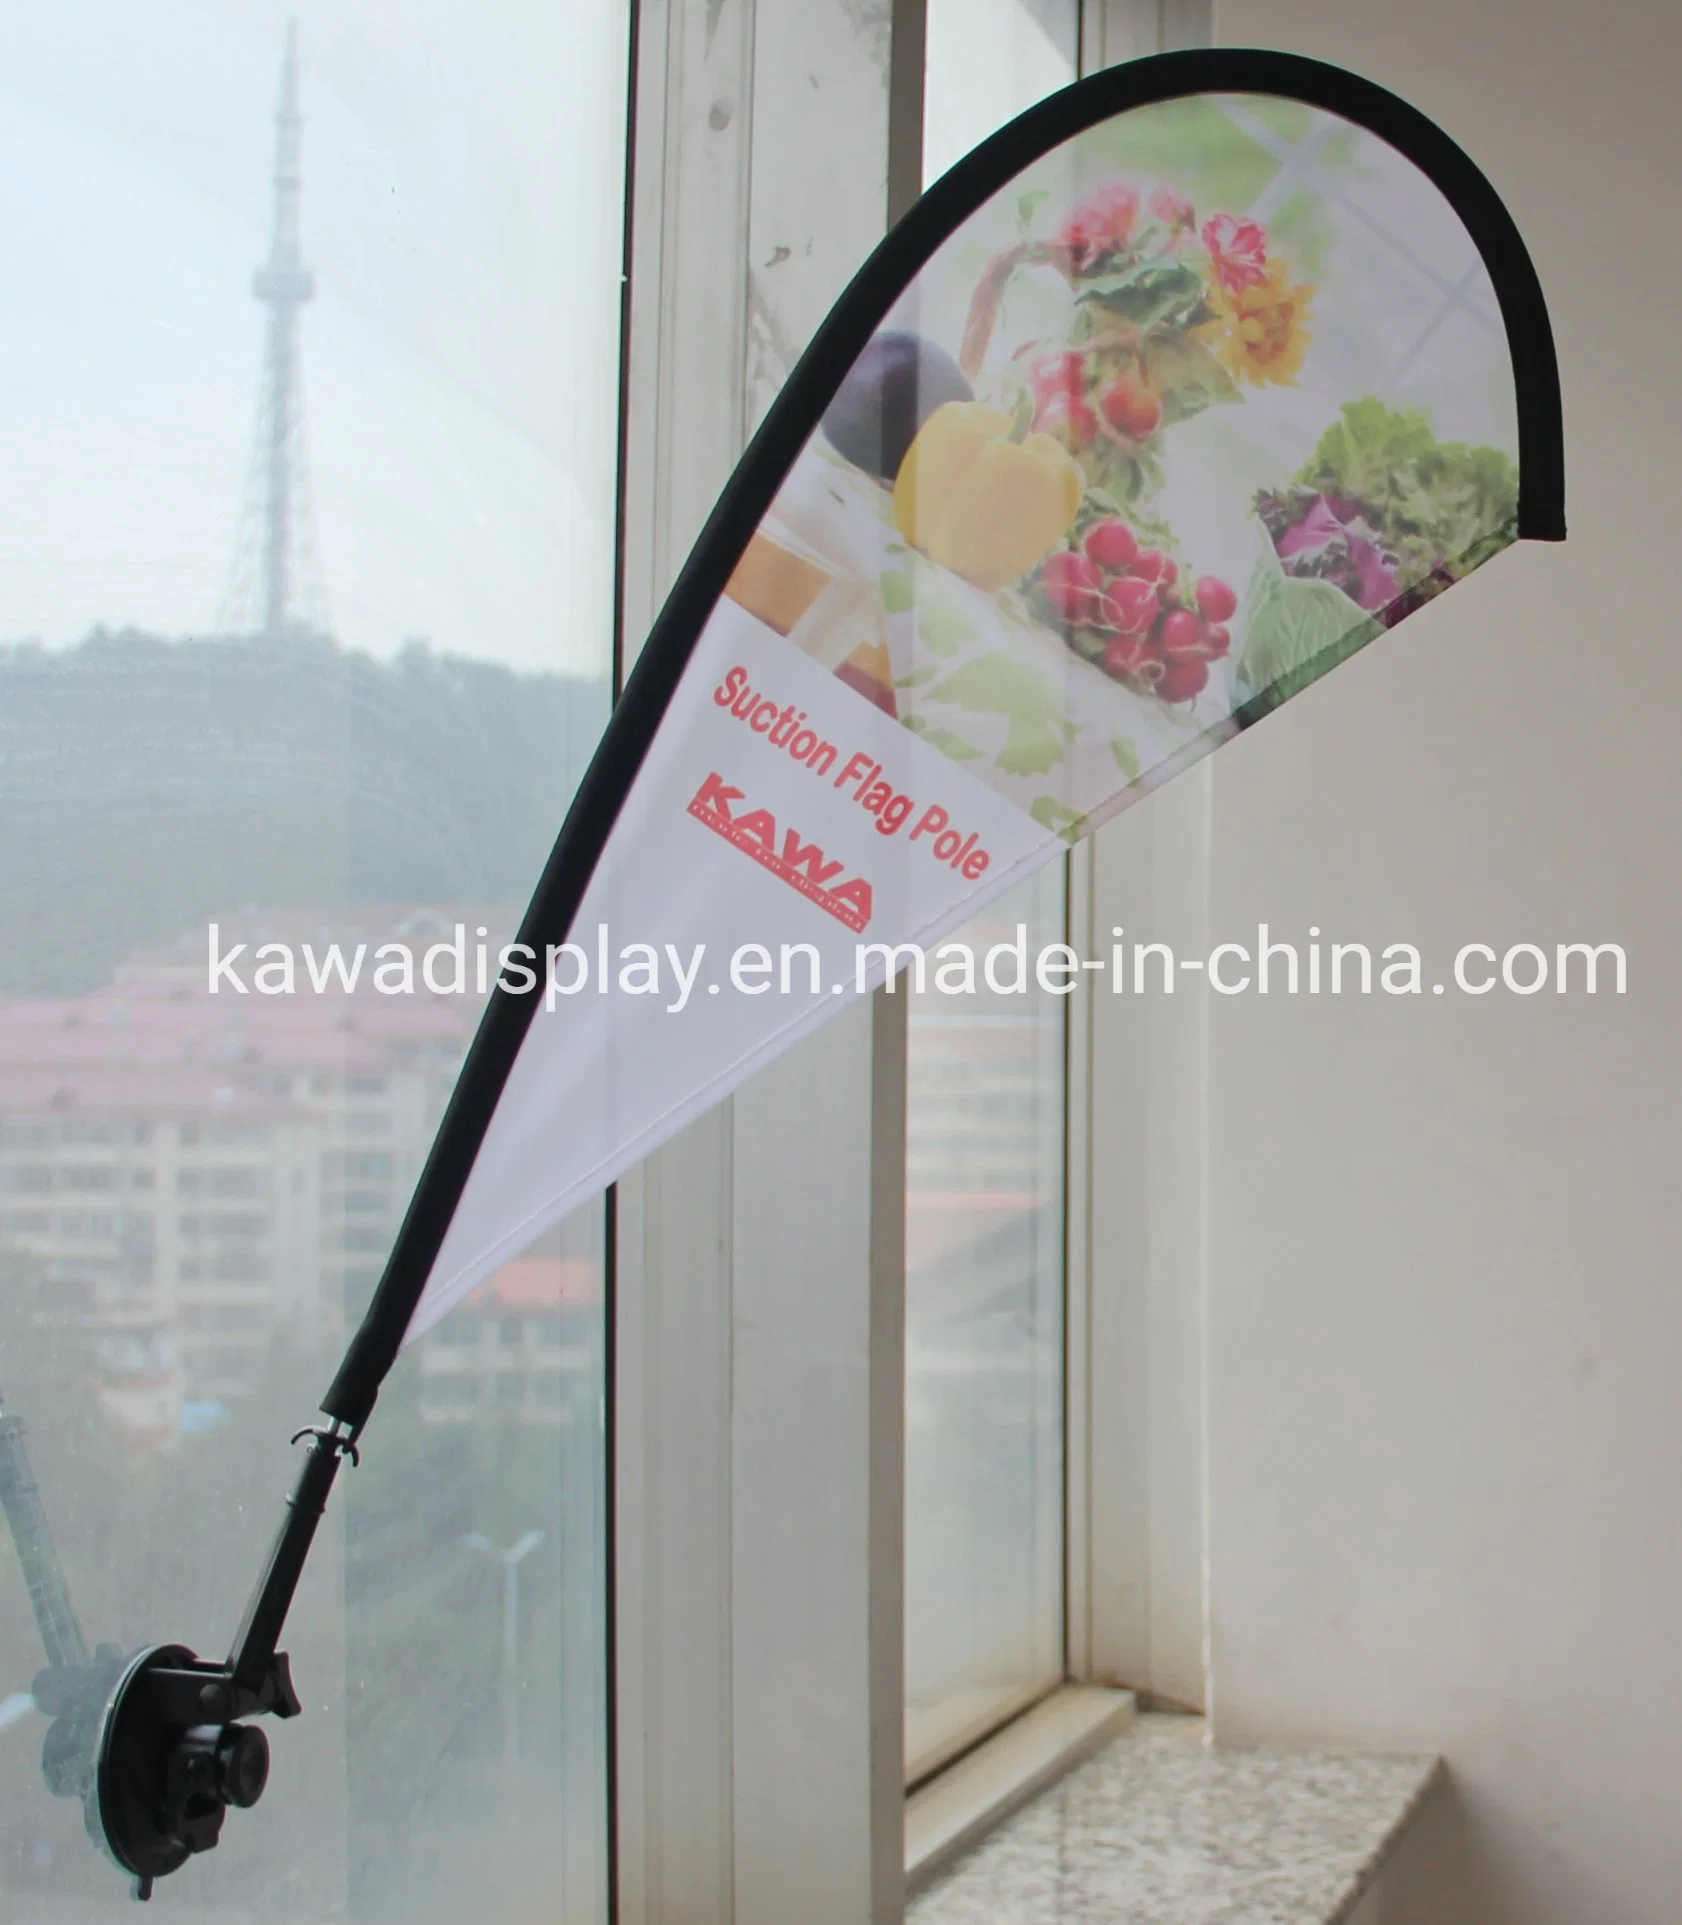 53cm Mini Promotional Angle Adjustable Promotional Display Suction Cup Flag for Advertising